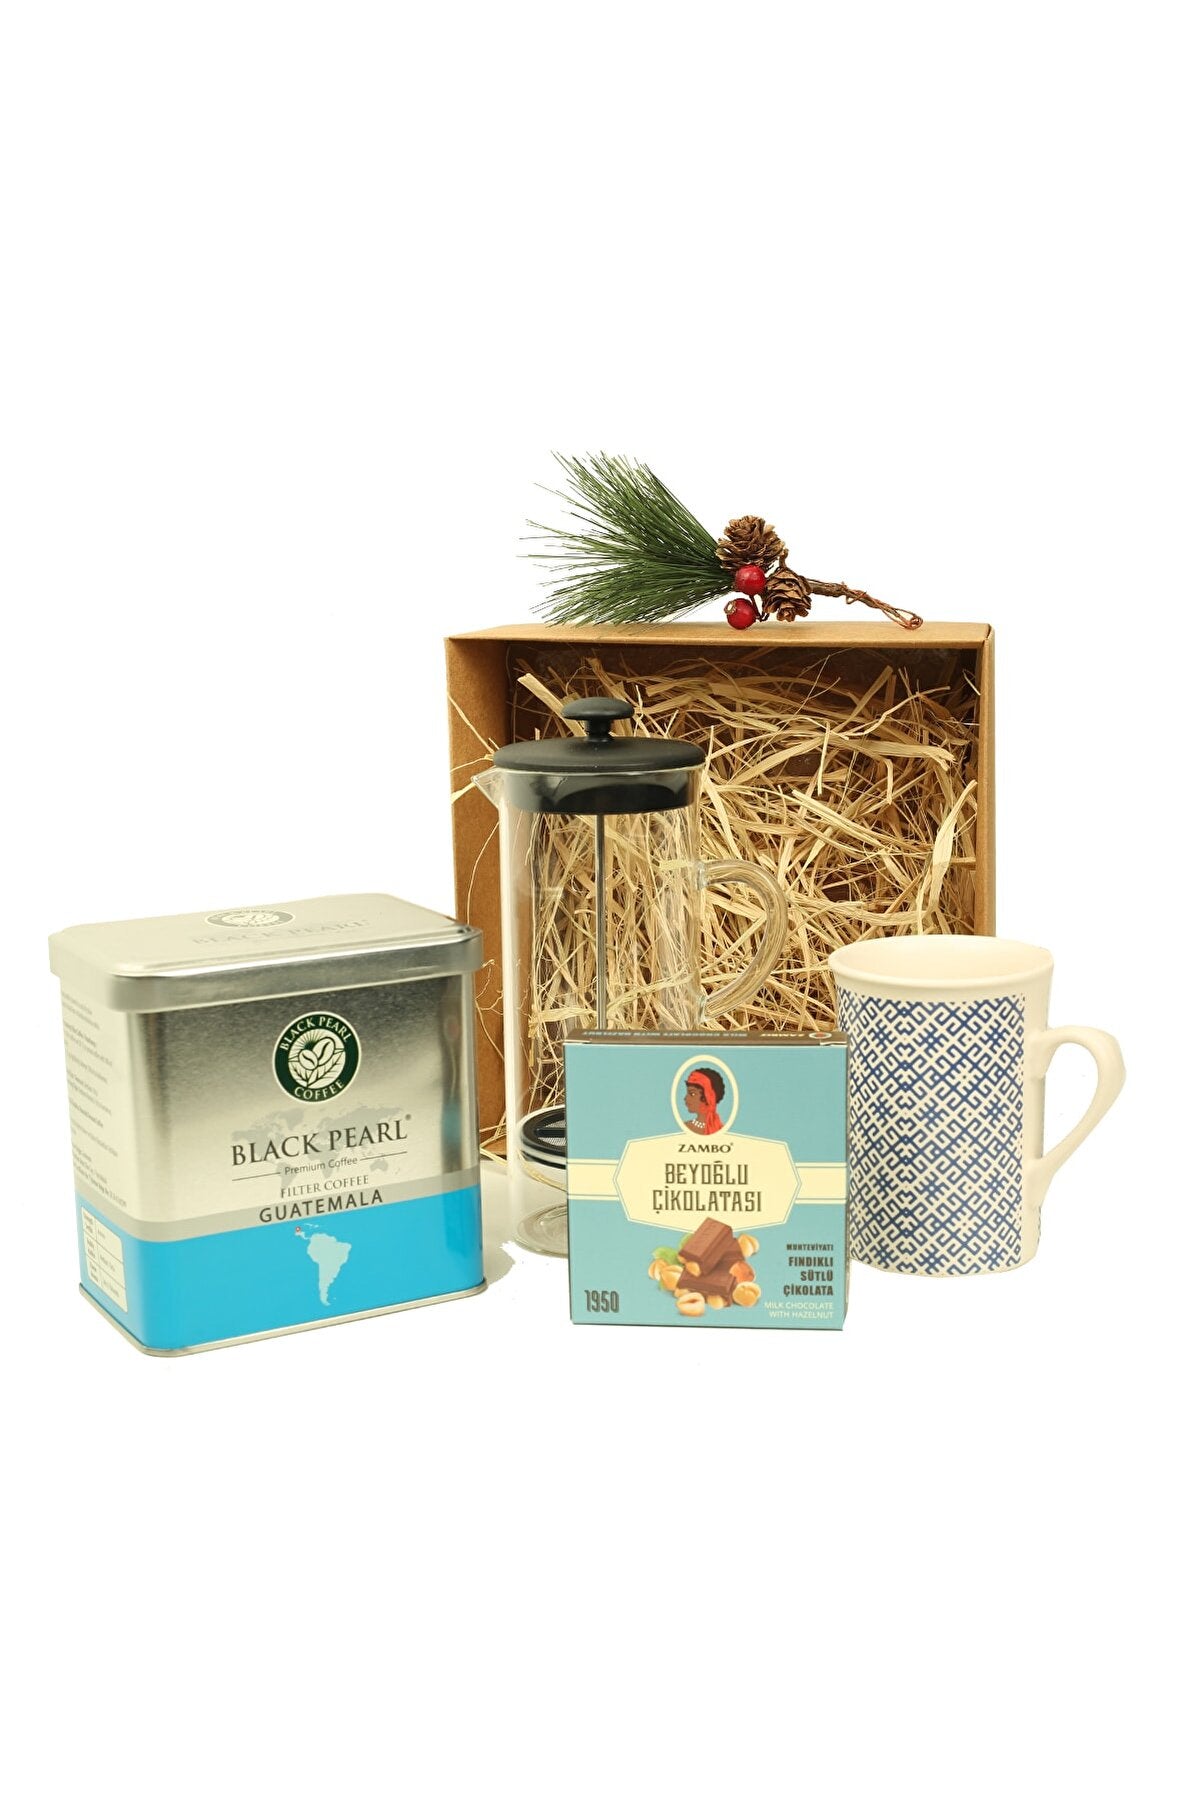 Coffee Lover Gift Sets on Chideno.ca